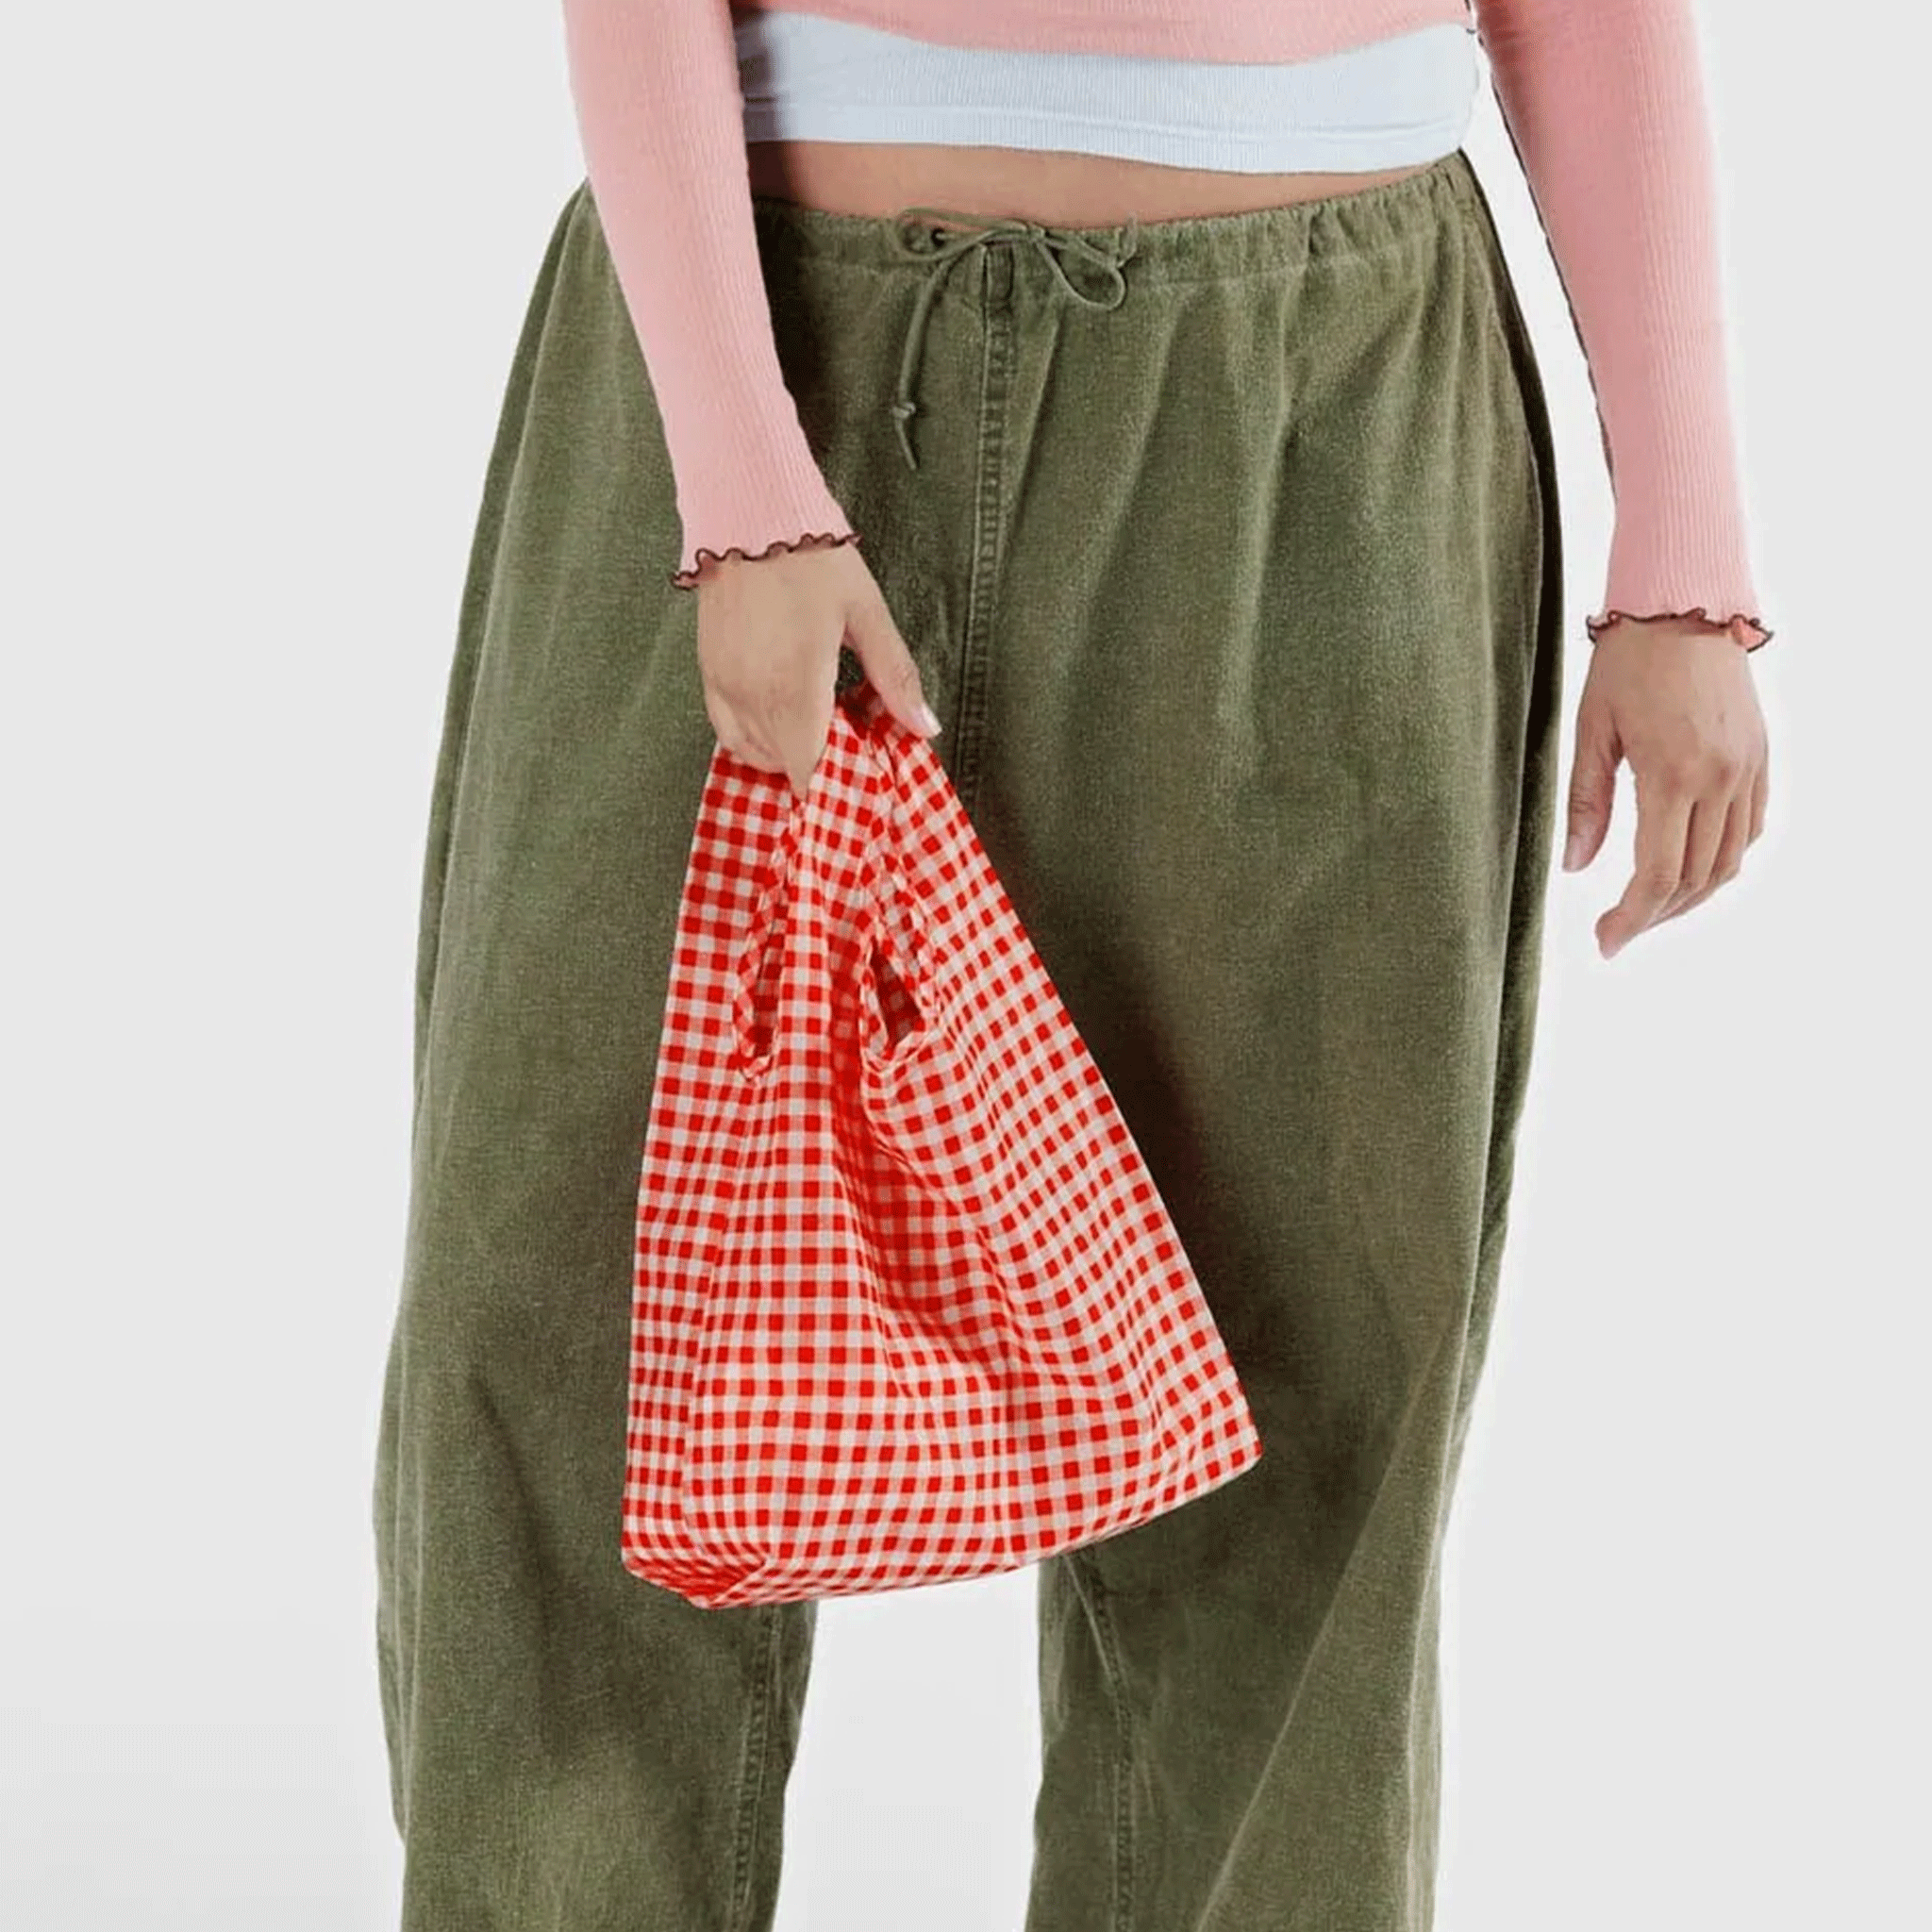 On a white background is a model holding a red gingham printed nylon tote bag. 